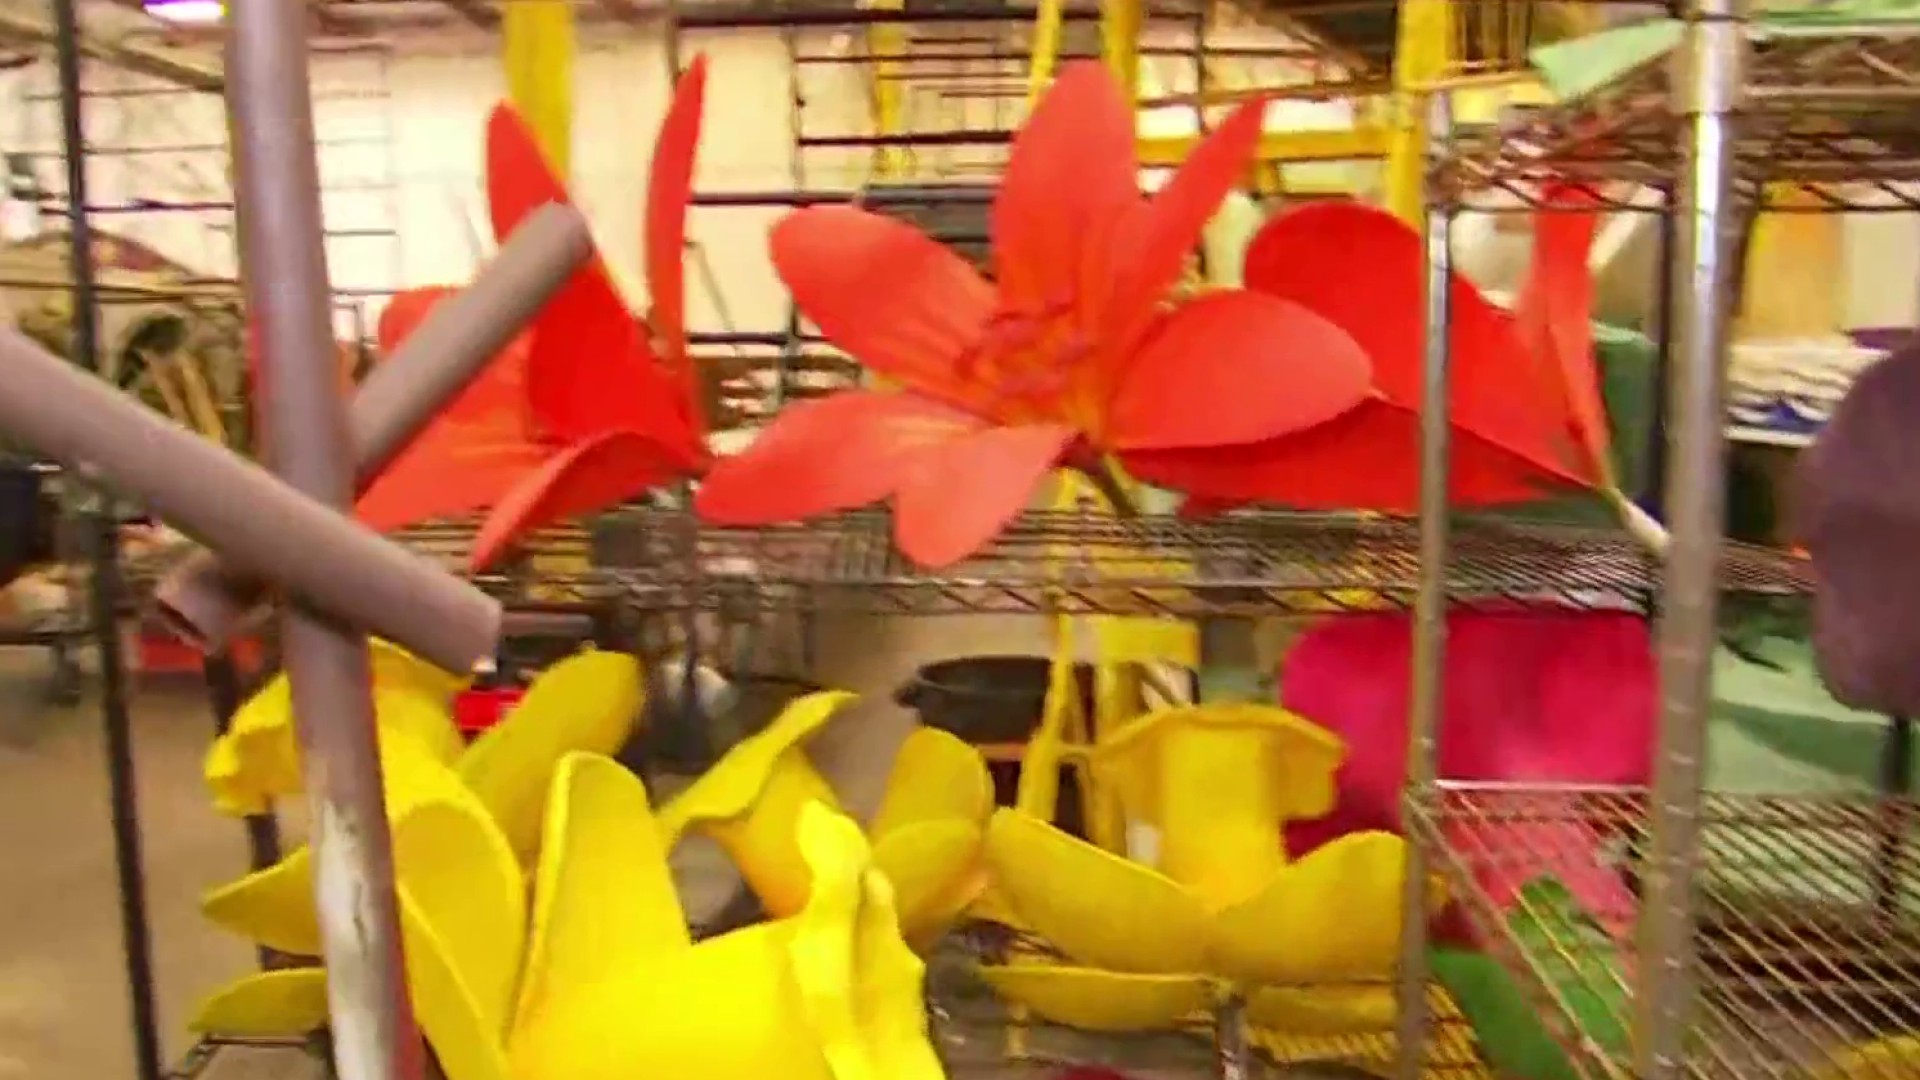 Final Preparations are Underway for the Rose Parade Floats